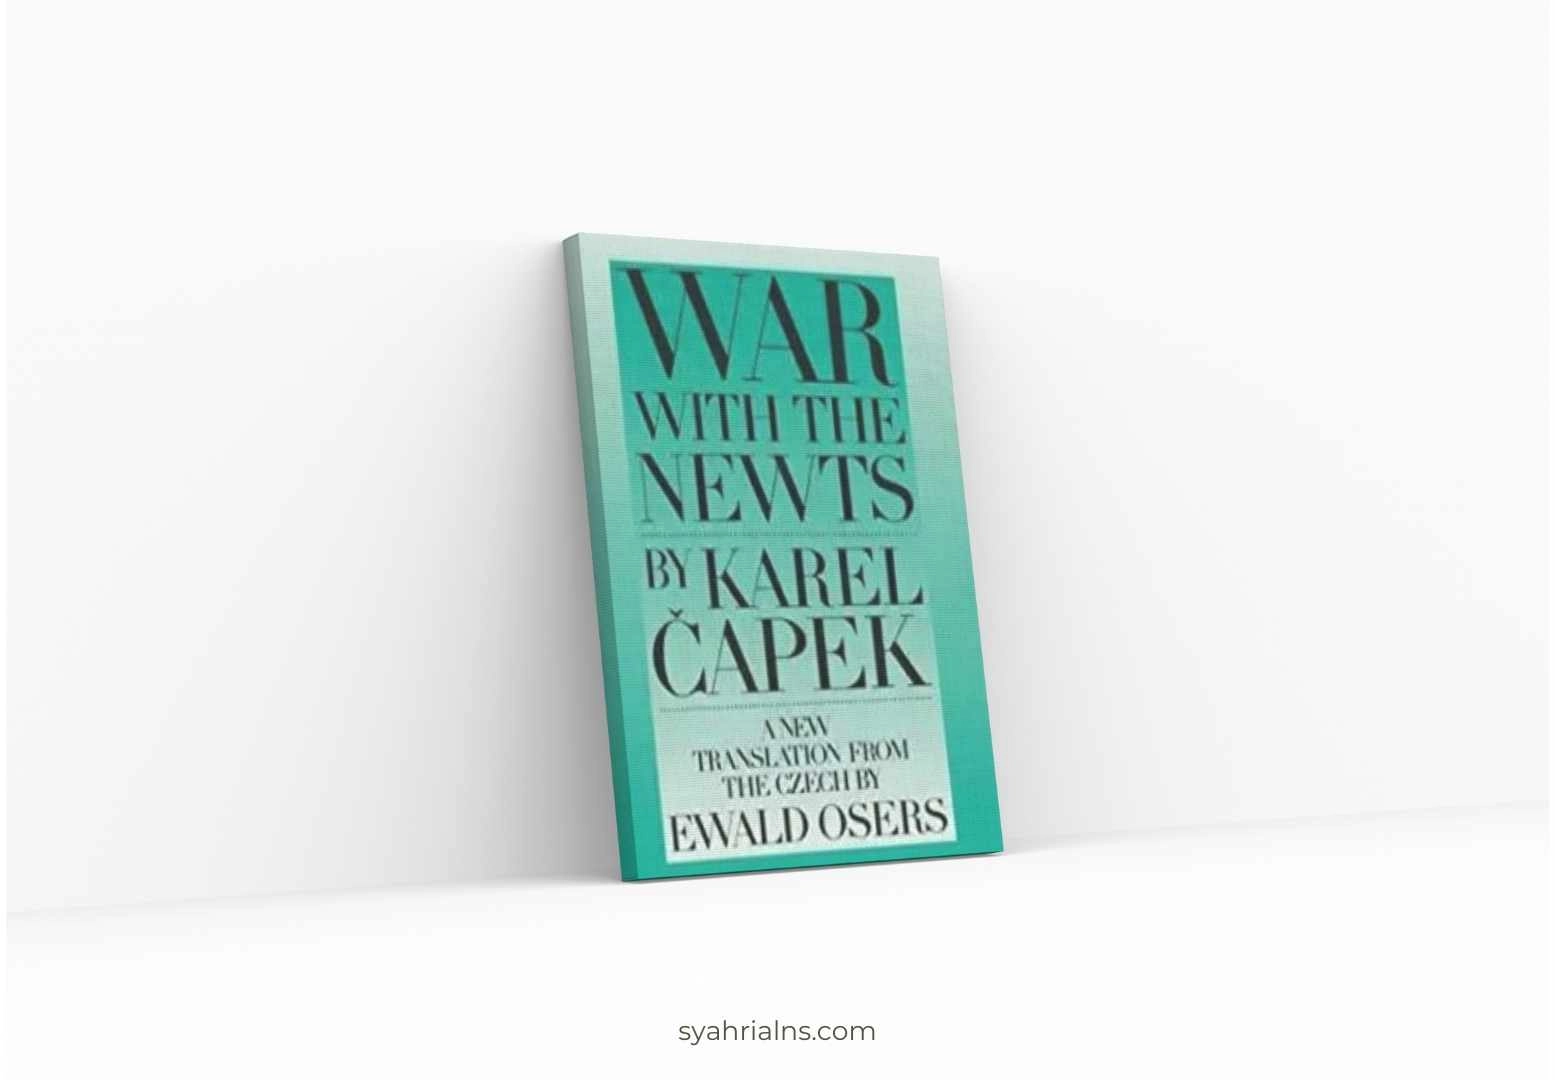 Books Like House of Leaves - War with the Newts by Karel Capek